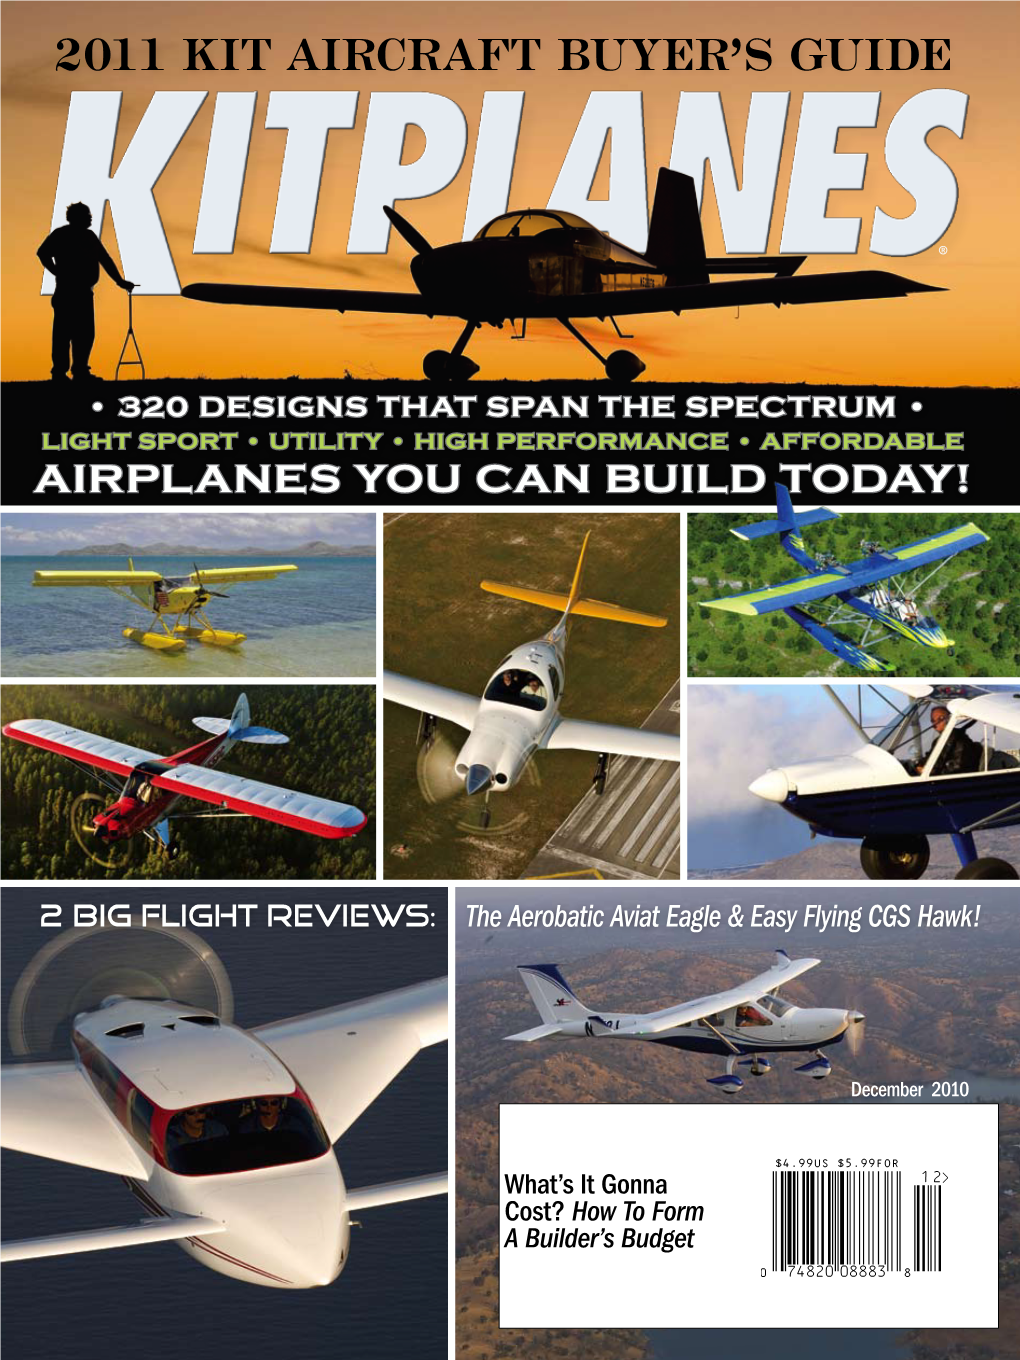 Airplanes You Can Build Today!